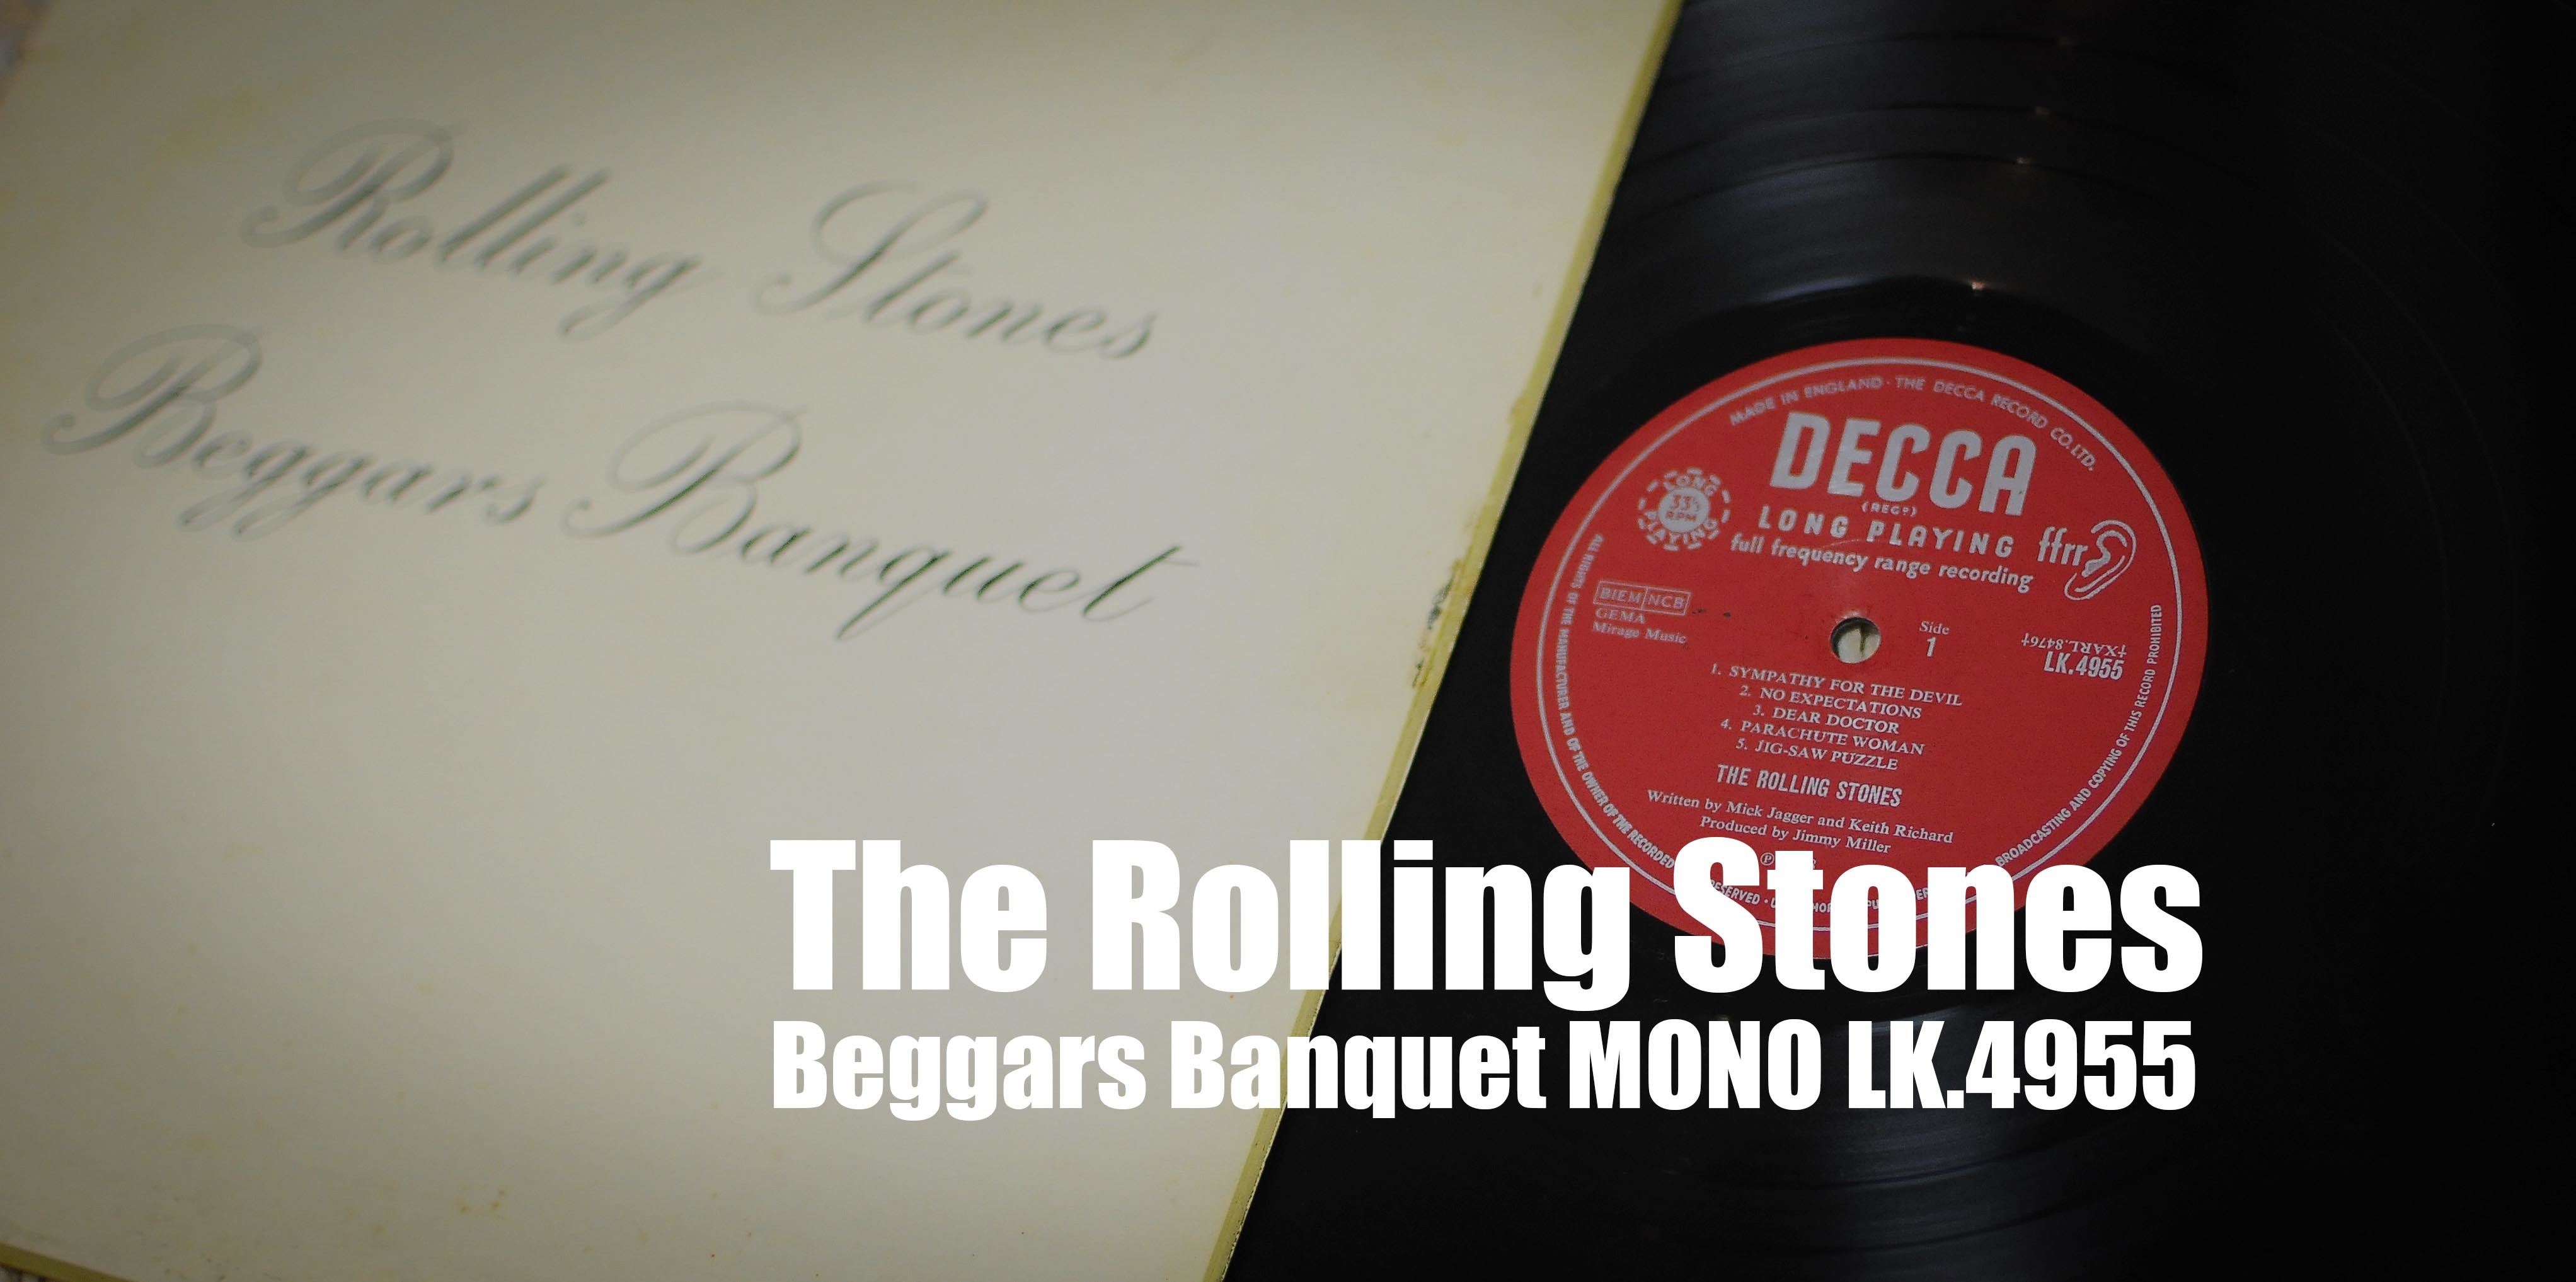 The Rolling Stones - Beggars Banquet MONO LK.4955 - The Rolling Stones